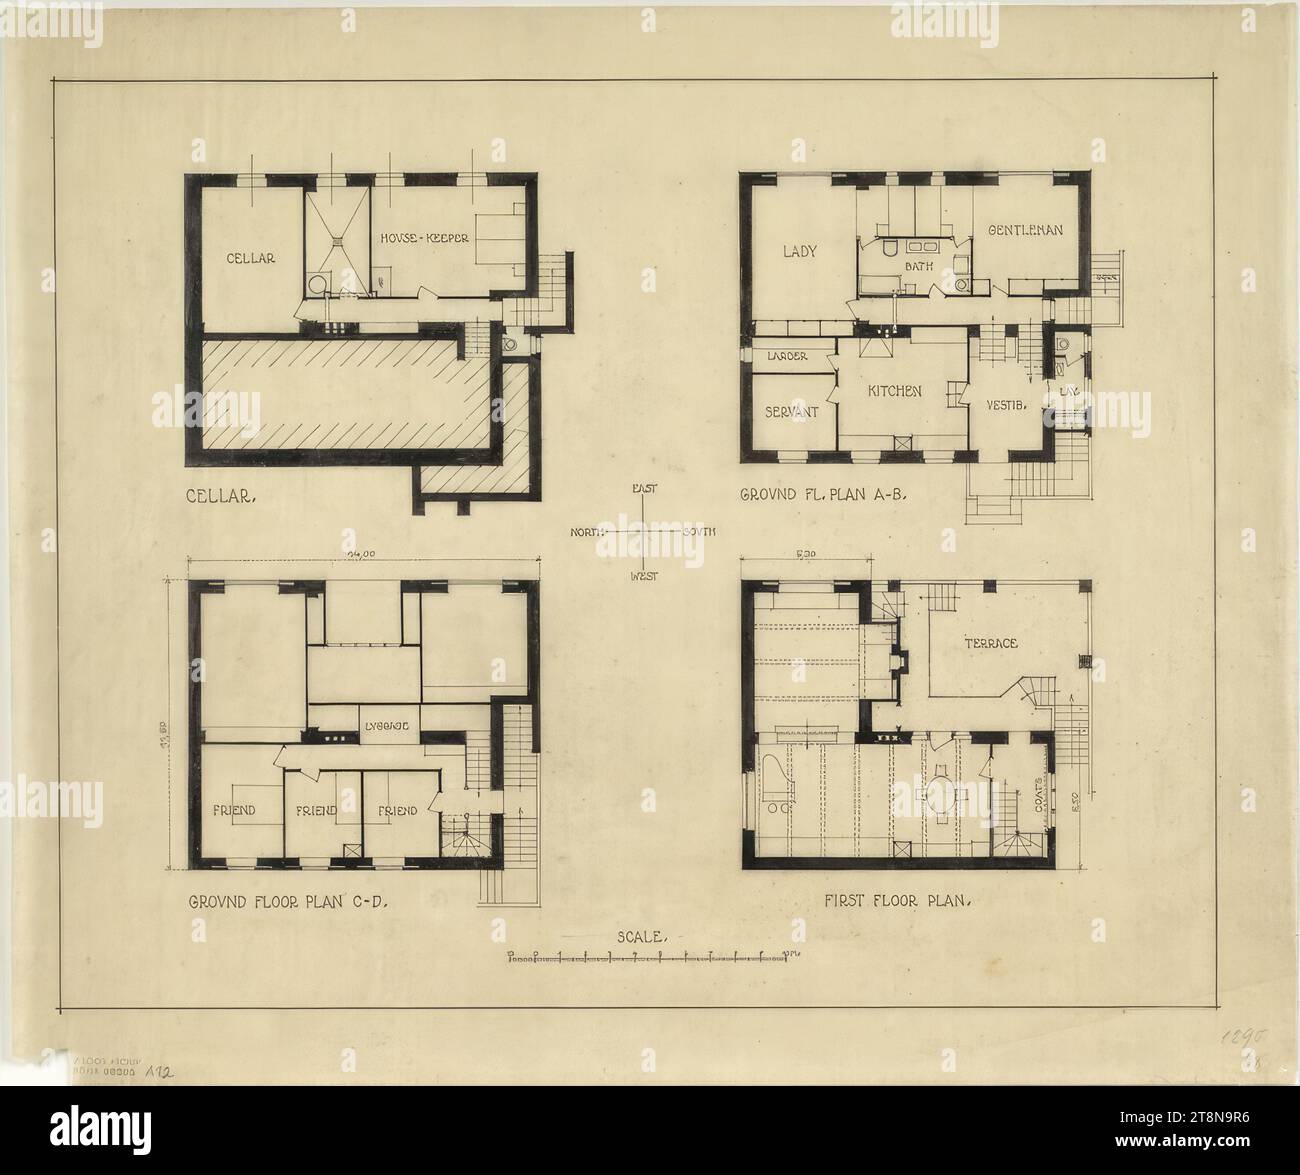 Villa Alexander Moissi, for the Lido, Venice, Italy, floor plans, 1923, architectural drawing, tracing paper; Ink, 421 x 509 mm Stock Photo